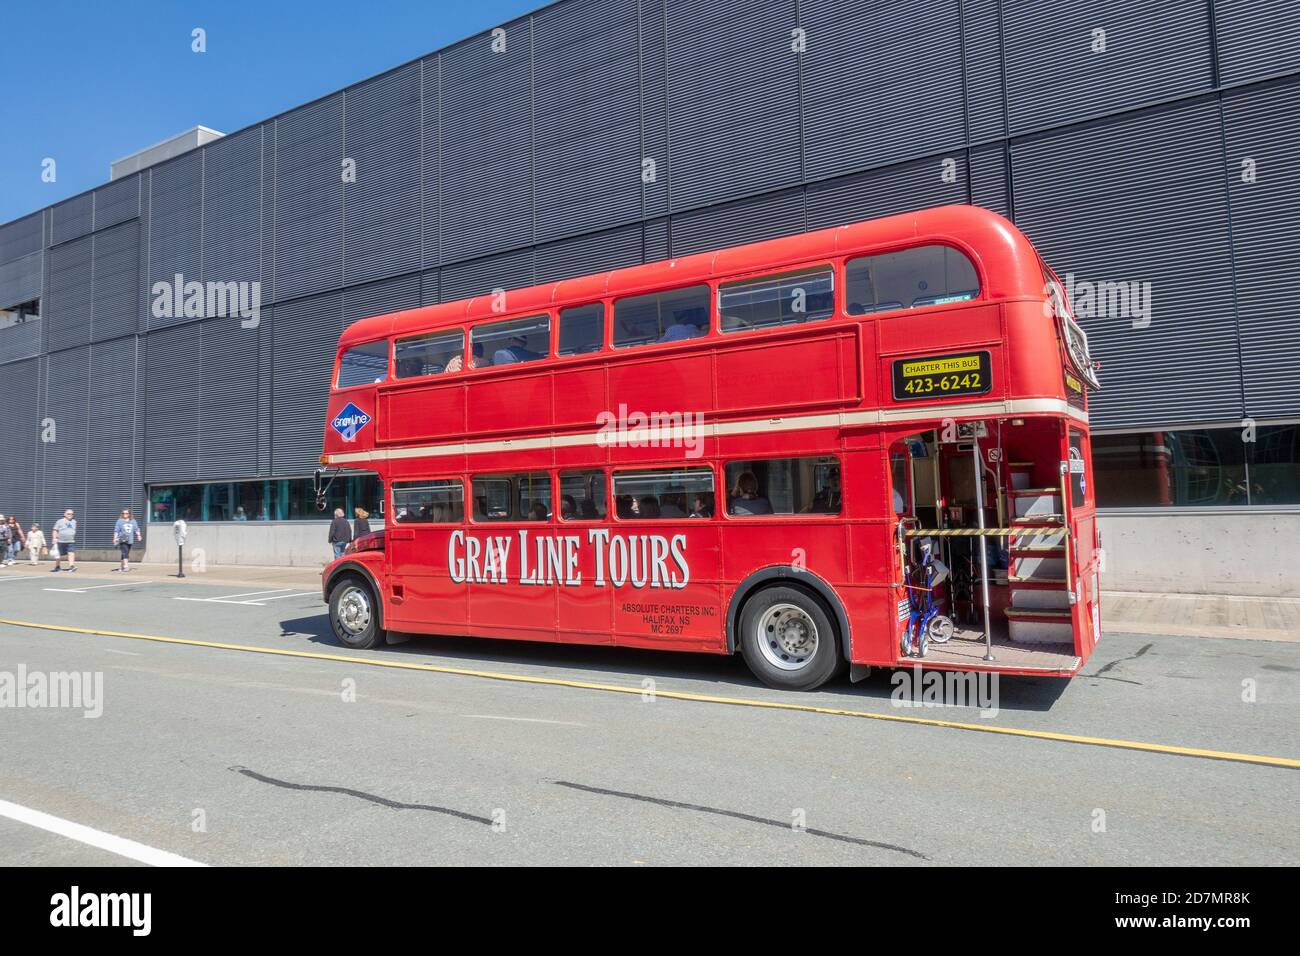 Gray Line Tourist Hop On Hop Off Vintage Red London Double Decker Bus Routemaster 1965 Bus At Halifax Cruise Ship Terminal Nova Scotia Canada Stock Photo